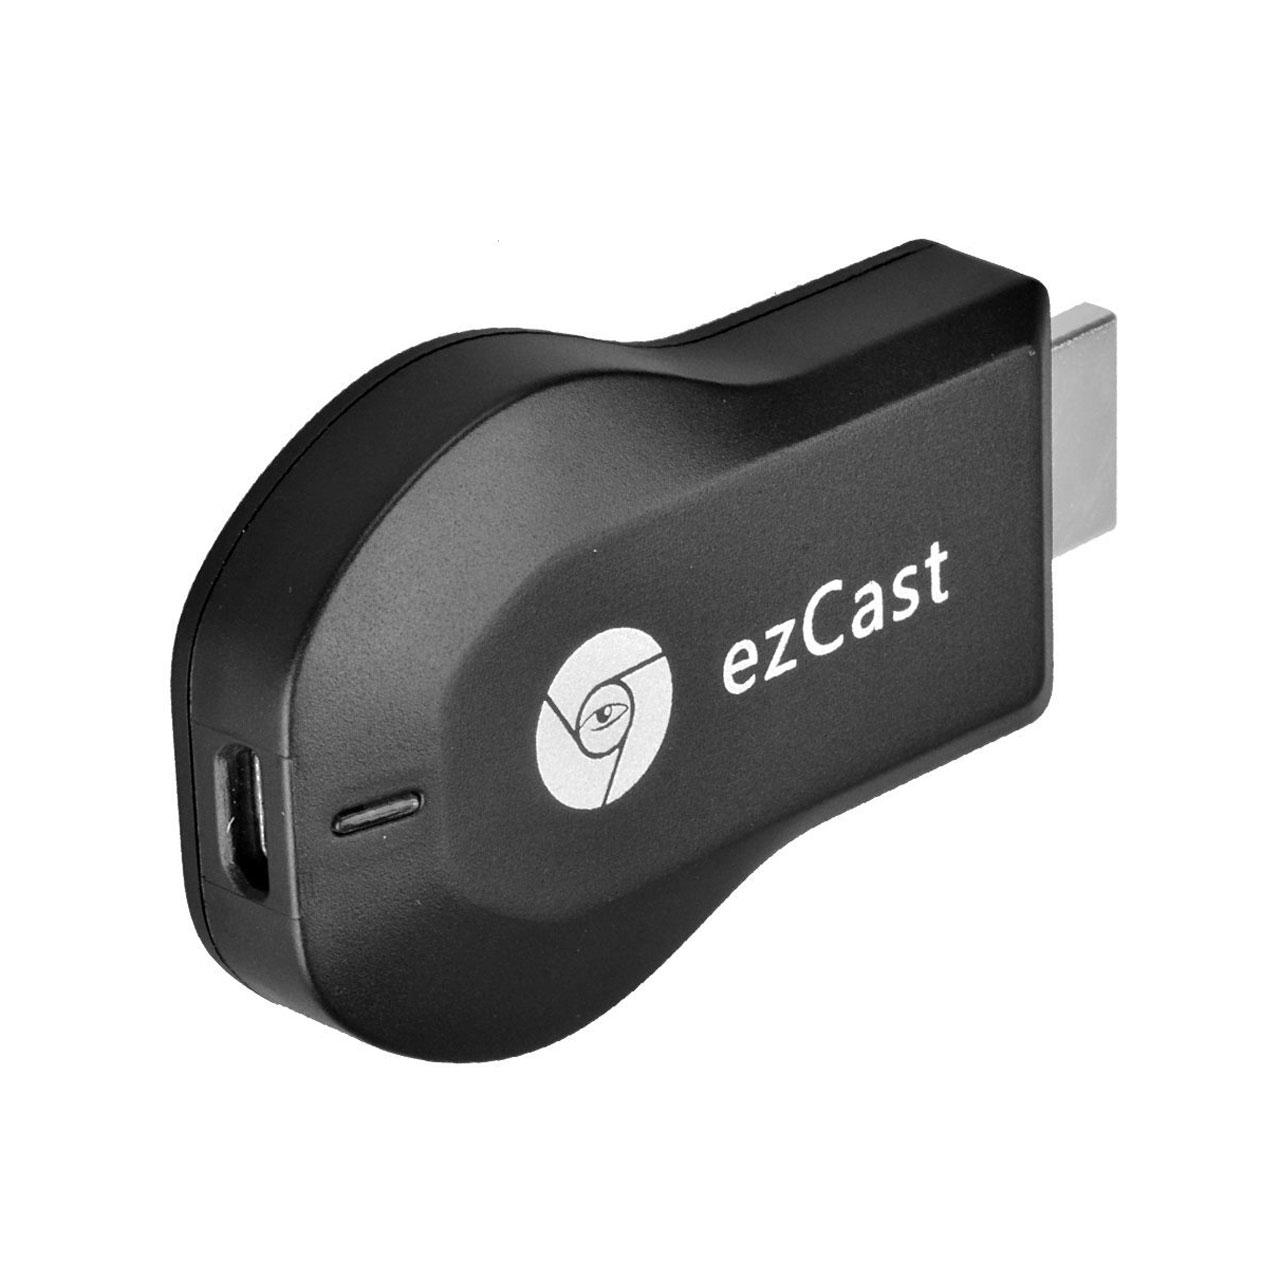 M2 Android 1080P Ezcast HDMI Dongle / HDMI AirPlay DLNA WIFI Displayer Receiver for Android OS / iOS / MAC OS / Windows Devices, Support Sharing Online to TV WIFI Display